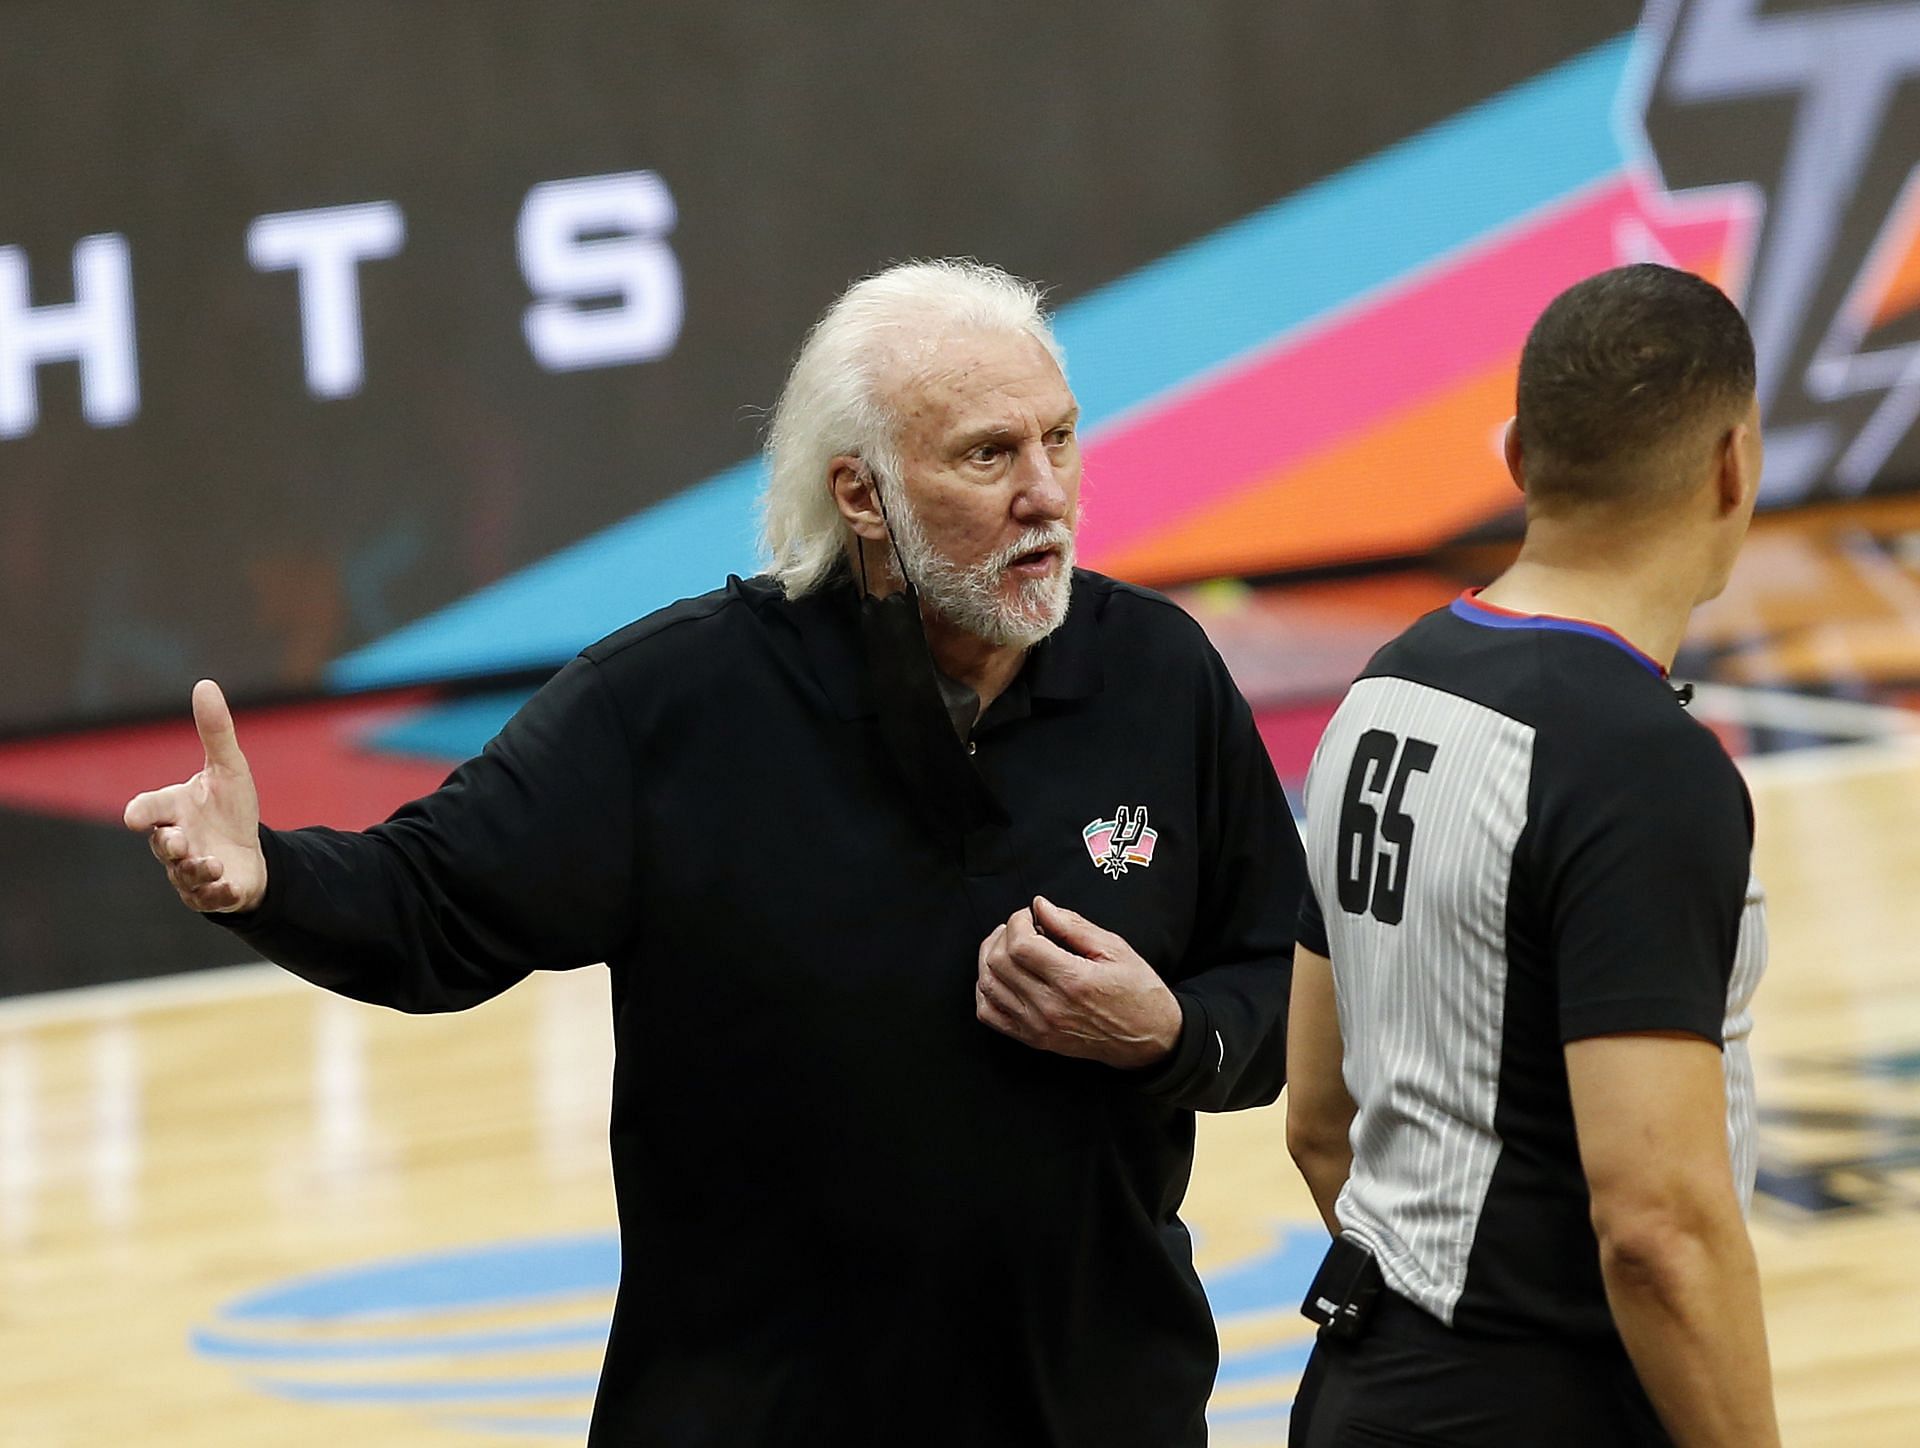 Popovich arguing with the referee